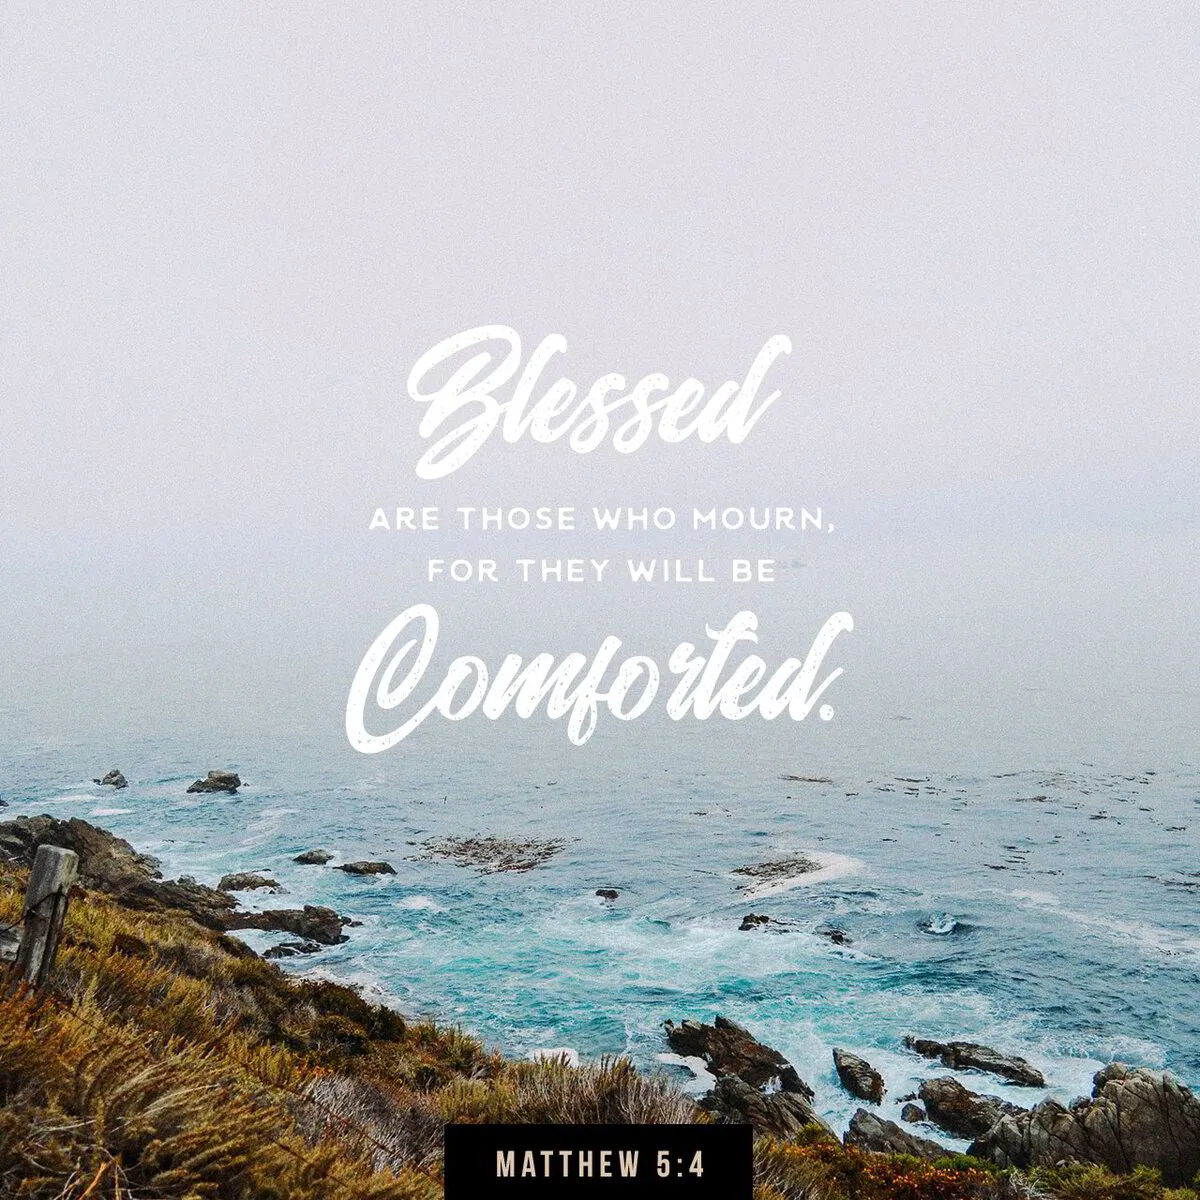 The Beatitudes: Blessed Are Those Who Mourn, For They Shall Be Comforted